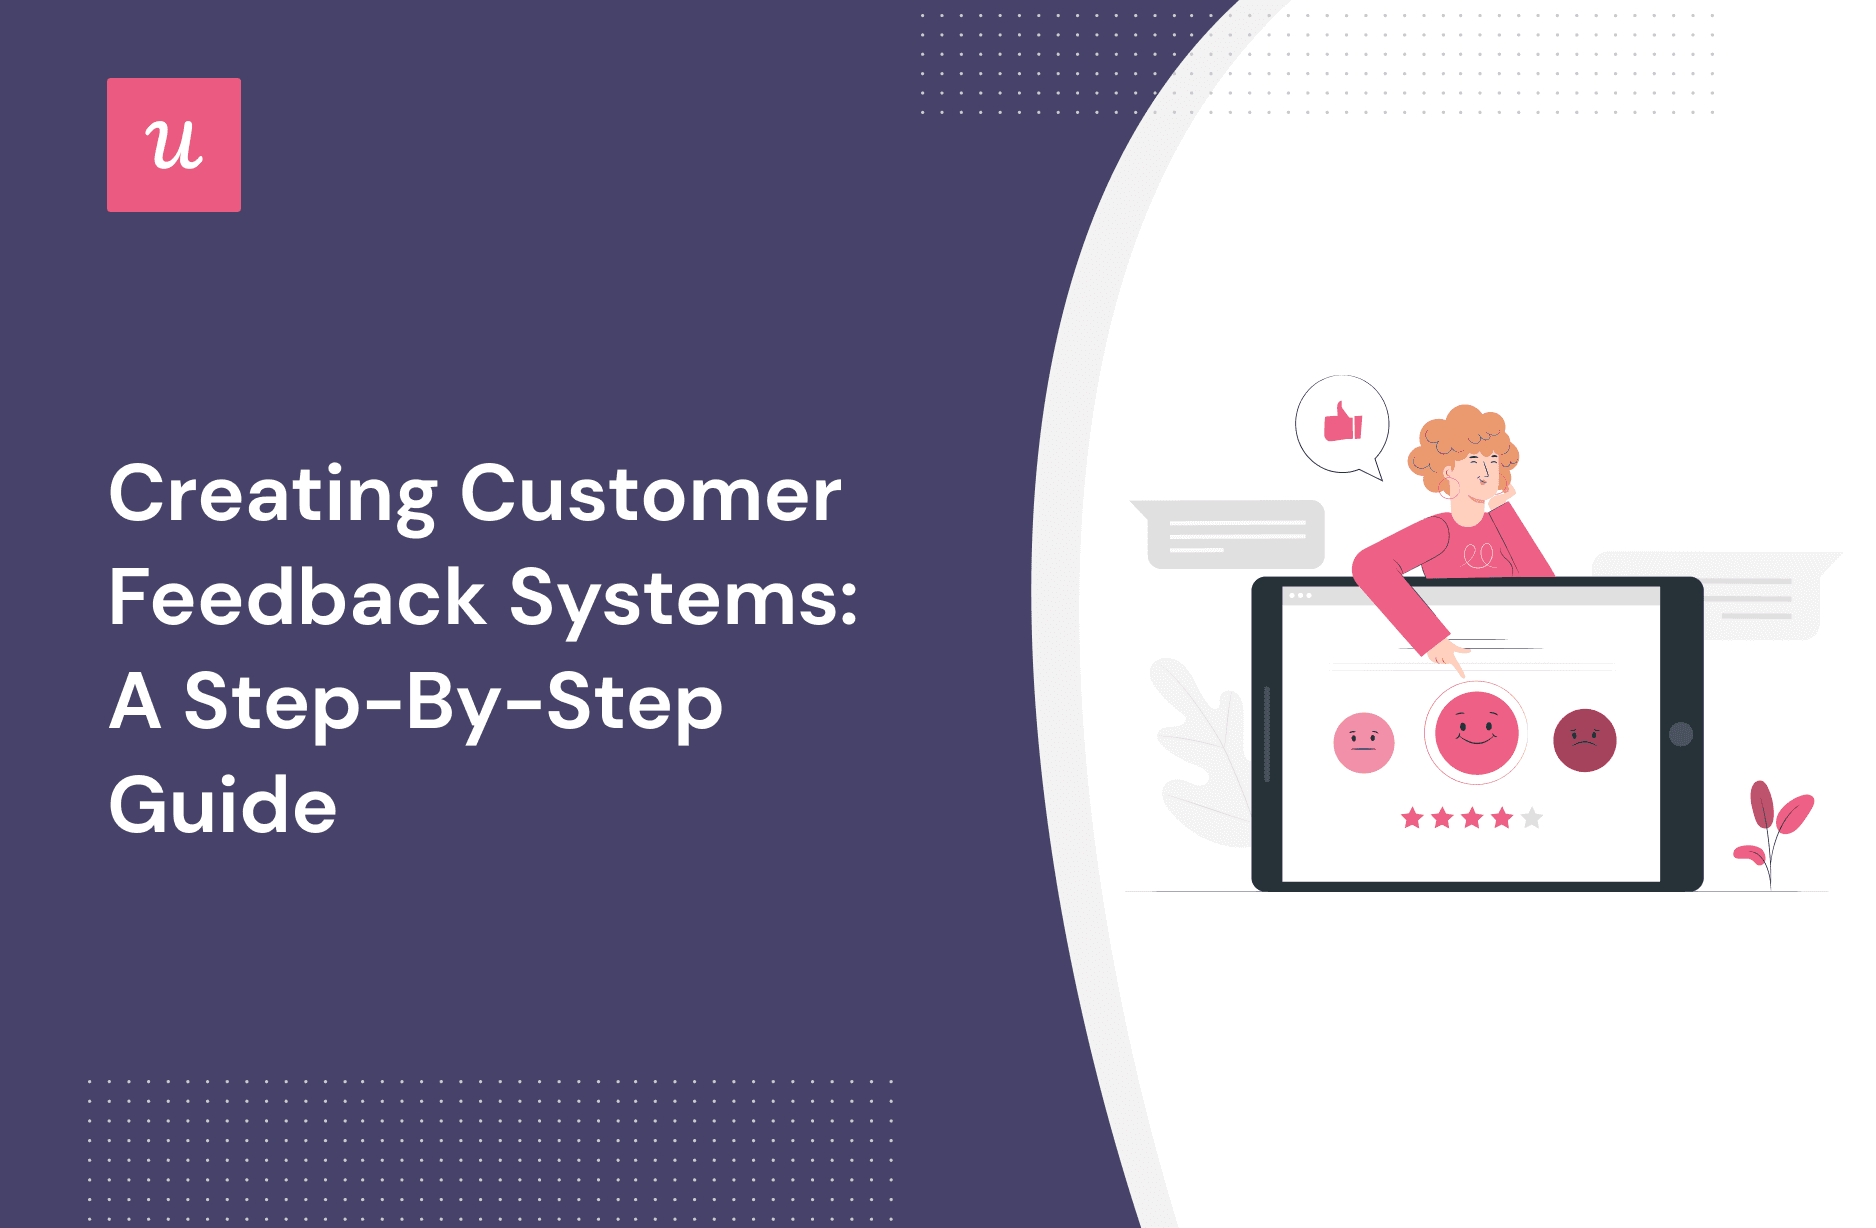 Creating Customer Feedback Systems: A Step-By-Step Guide cover